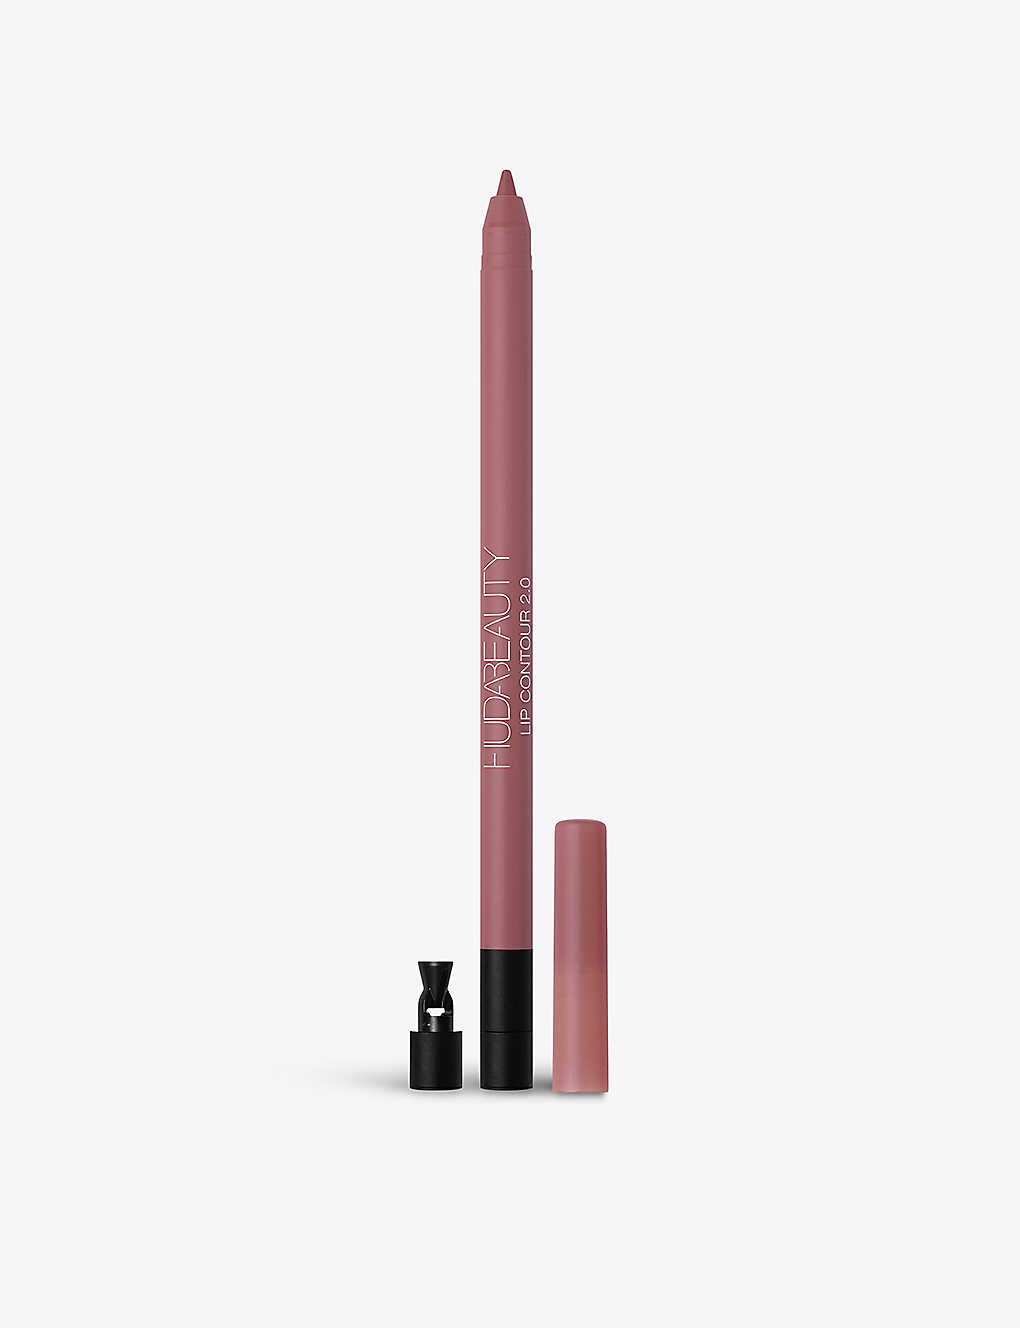 Huda Beauty Lip Contour 2.0 Lip Liner 0.5g In Muted Pink